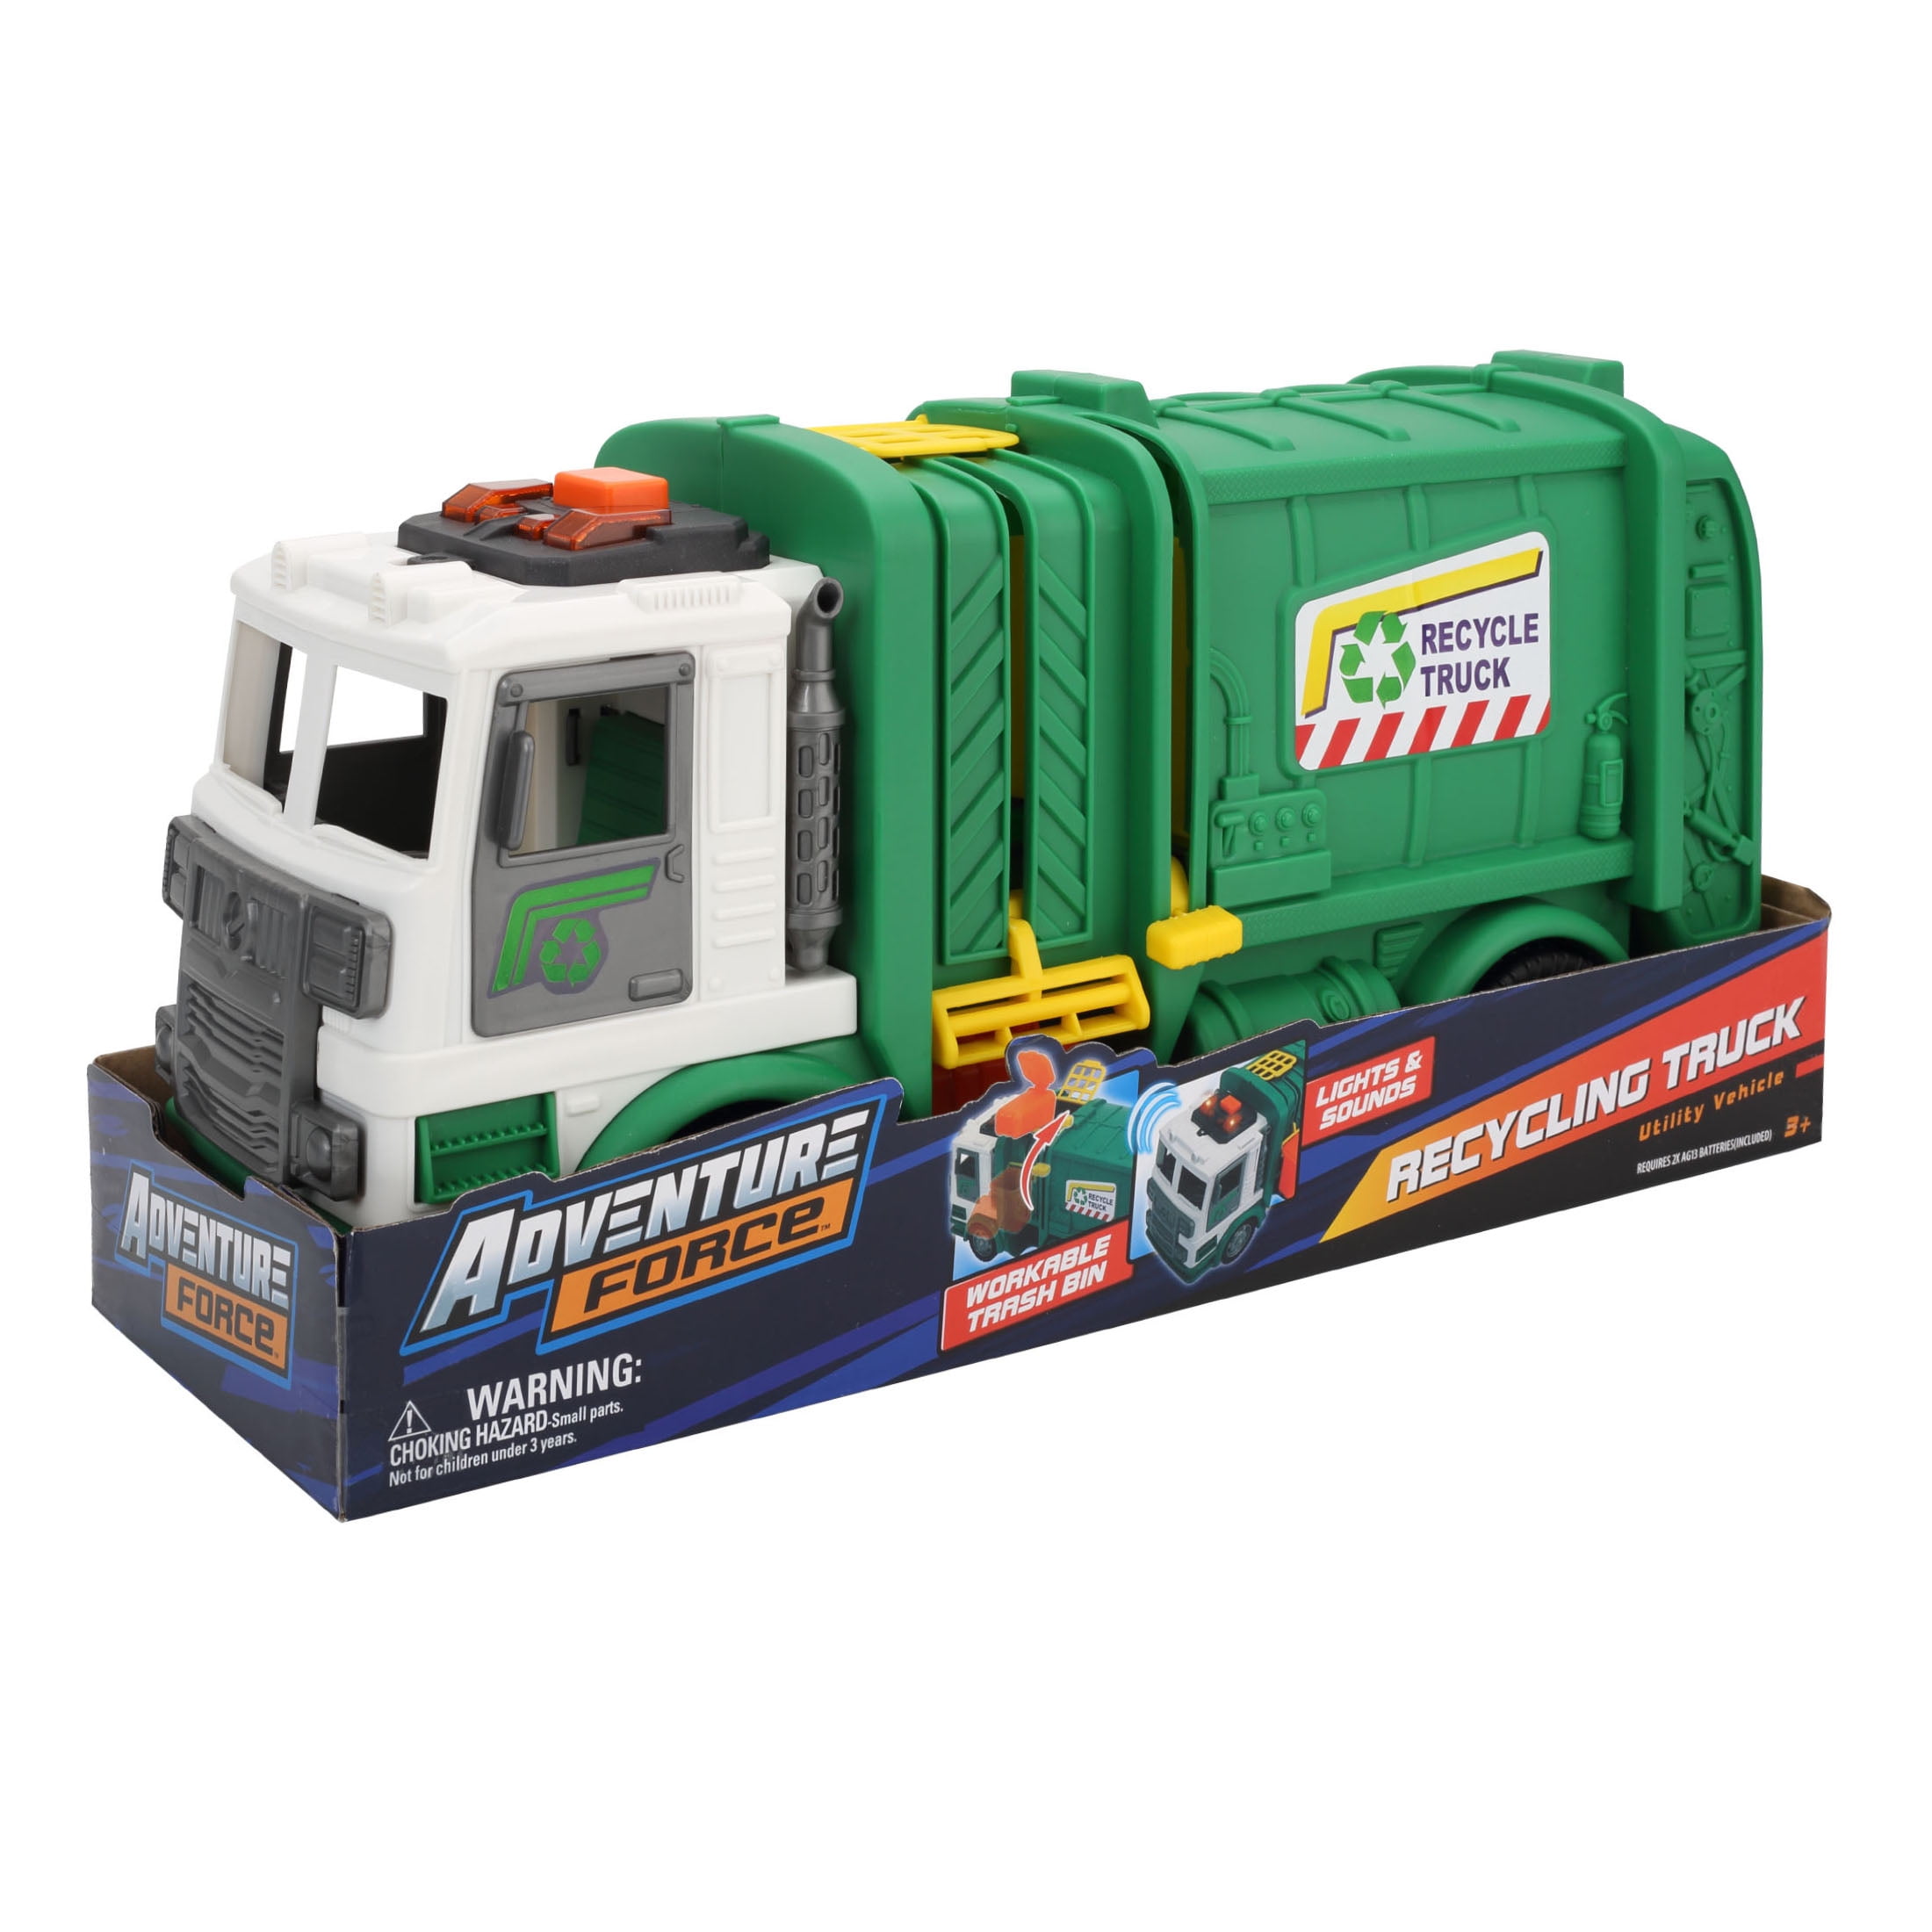 Adventure Force Utility Vehicle with Light & Sound - Recycle Truck: Realistic backup lights and recycle truck sounds; Liftable elevator and rubbish bin; Free-wheeling rollable vehicle